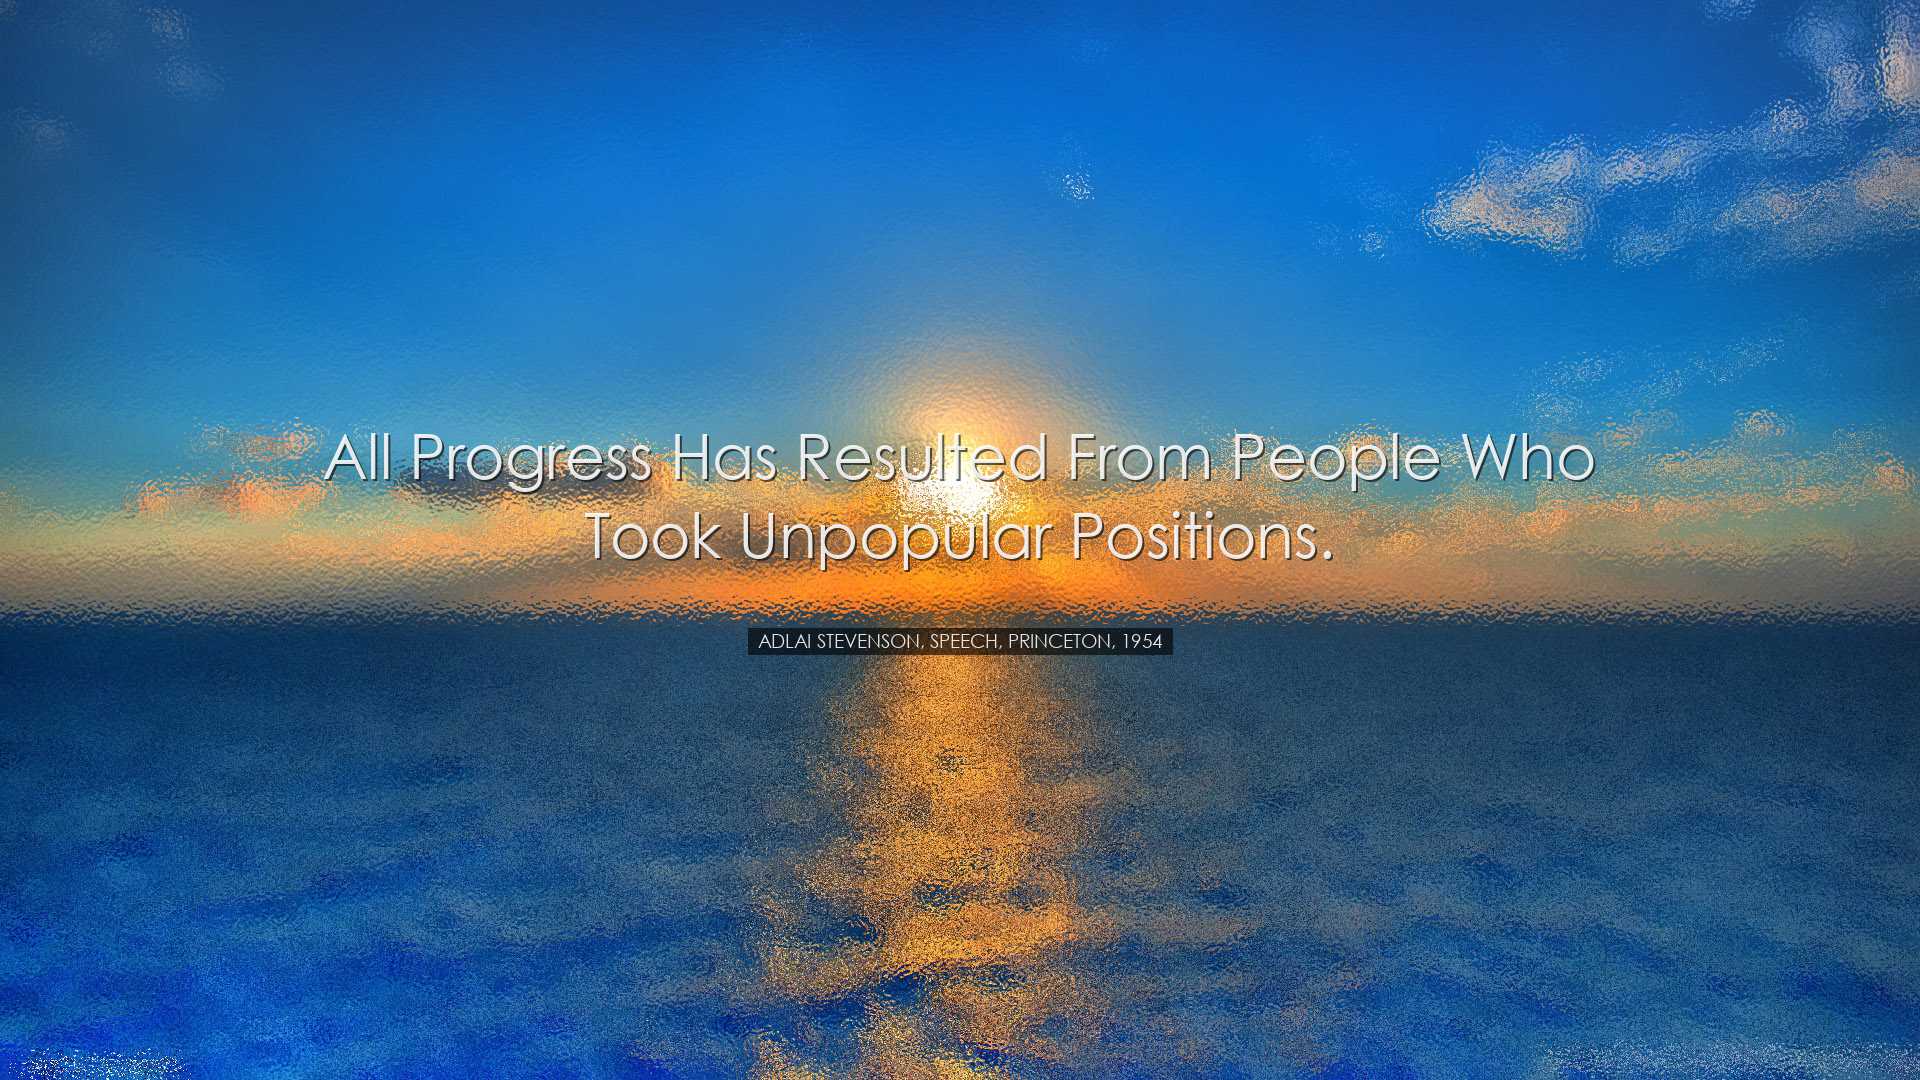 All progress has resulted from people who took unpopular positions